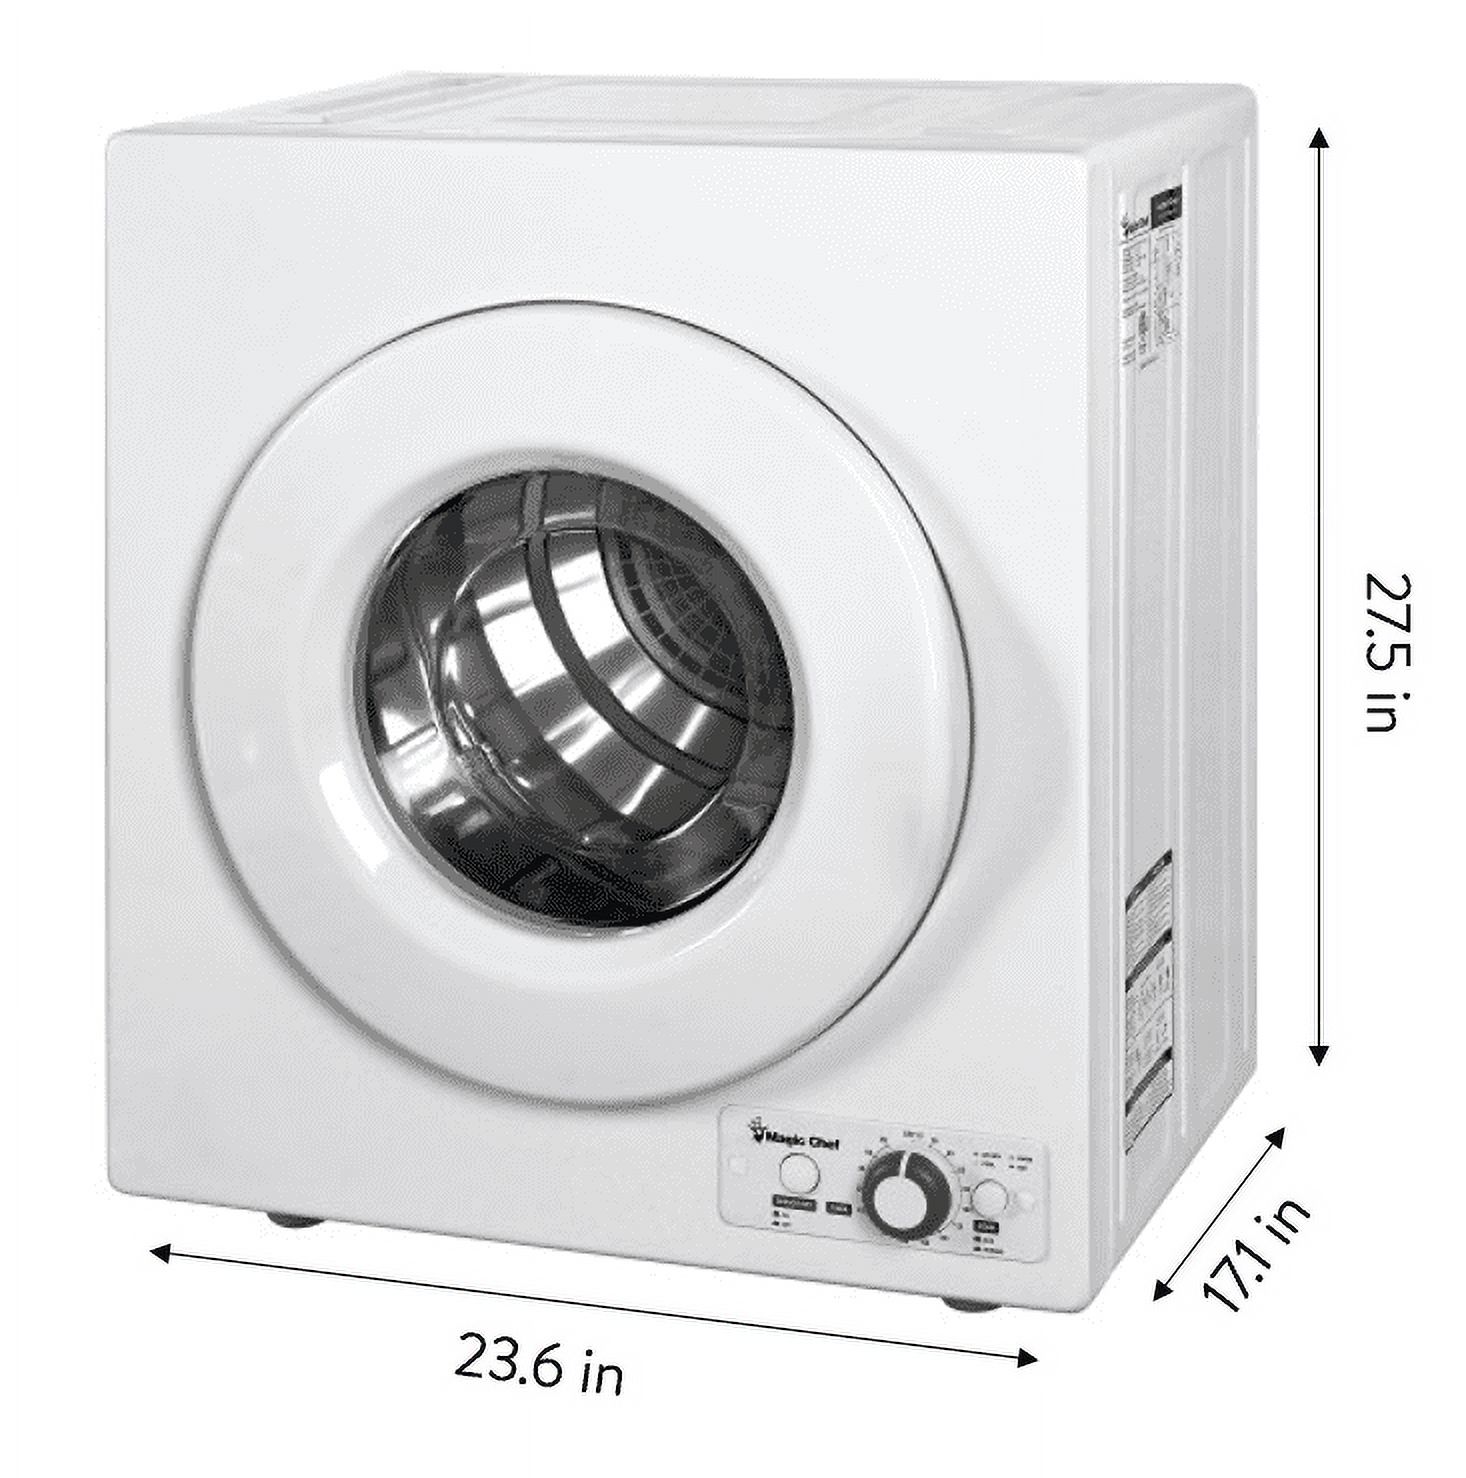 Magic Chef Brand 2.6 Cu. ft. Electric Dryer in White, 17.5 in D, 27.5 in H, 23.6 in L, 48.4 lbs. - image 4 of 9